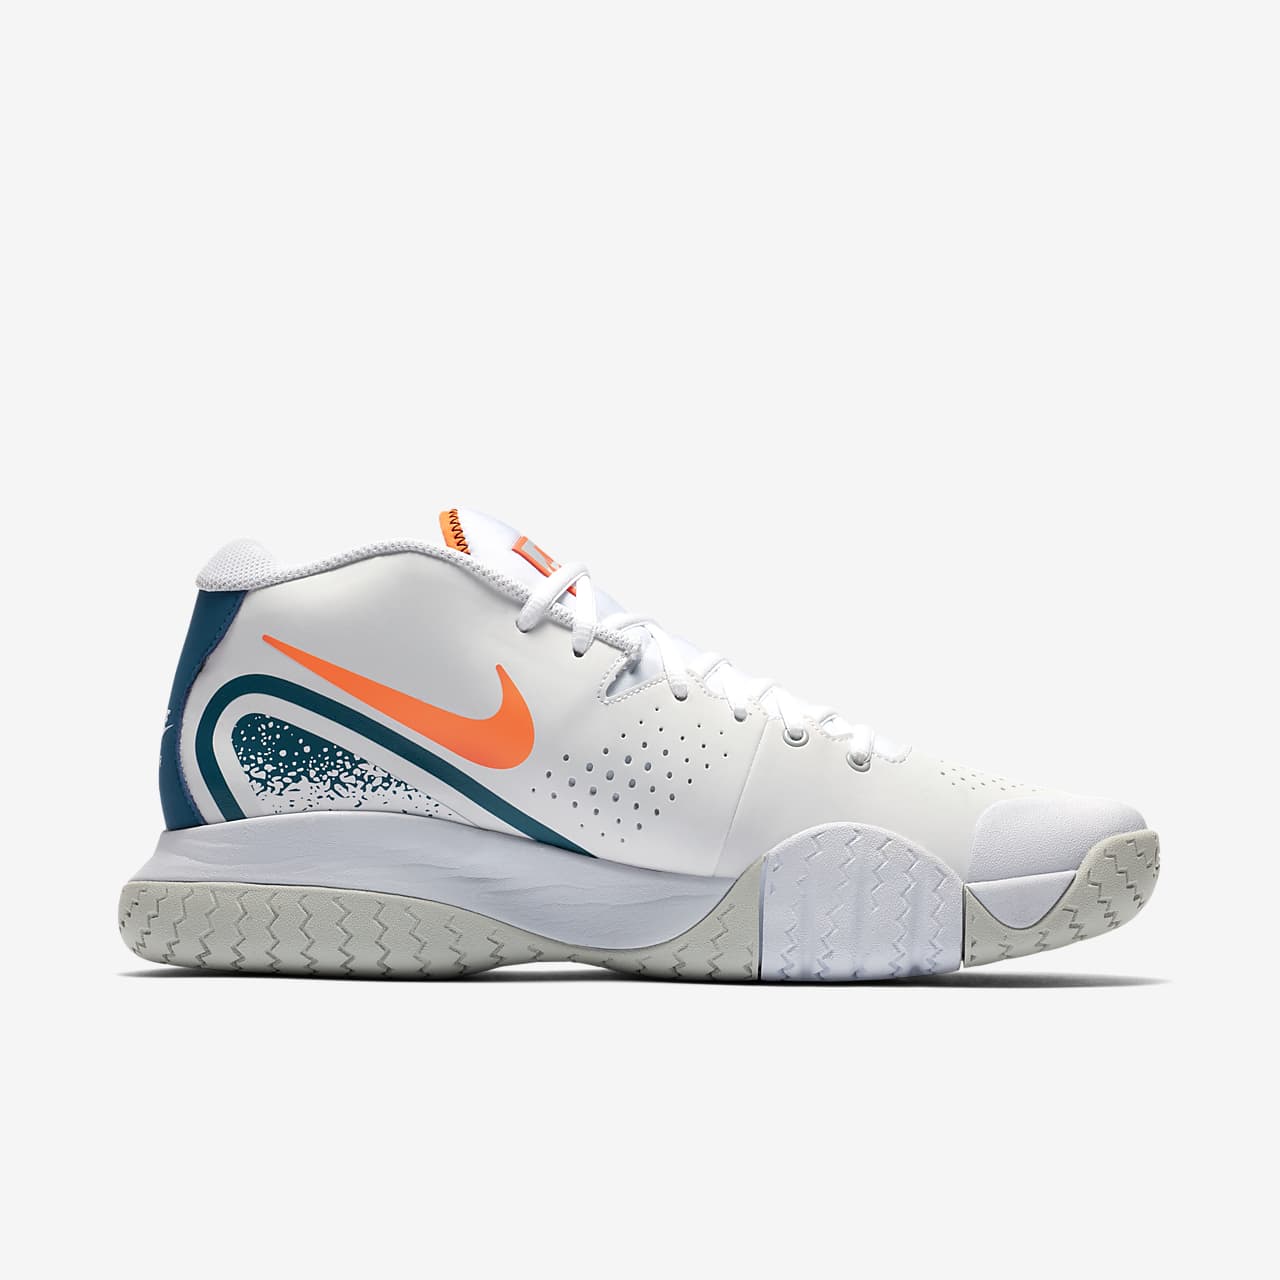 nike court tech challenge 20 review